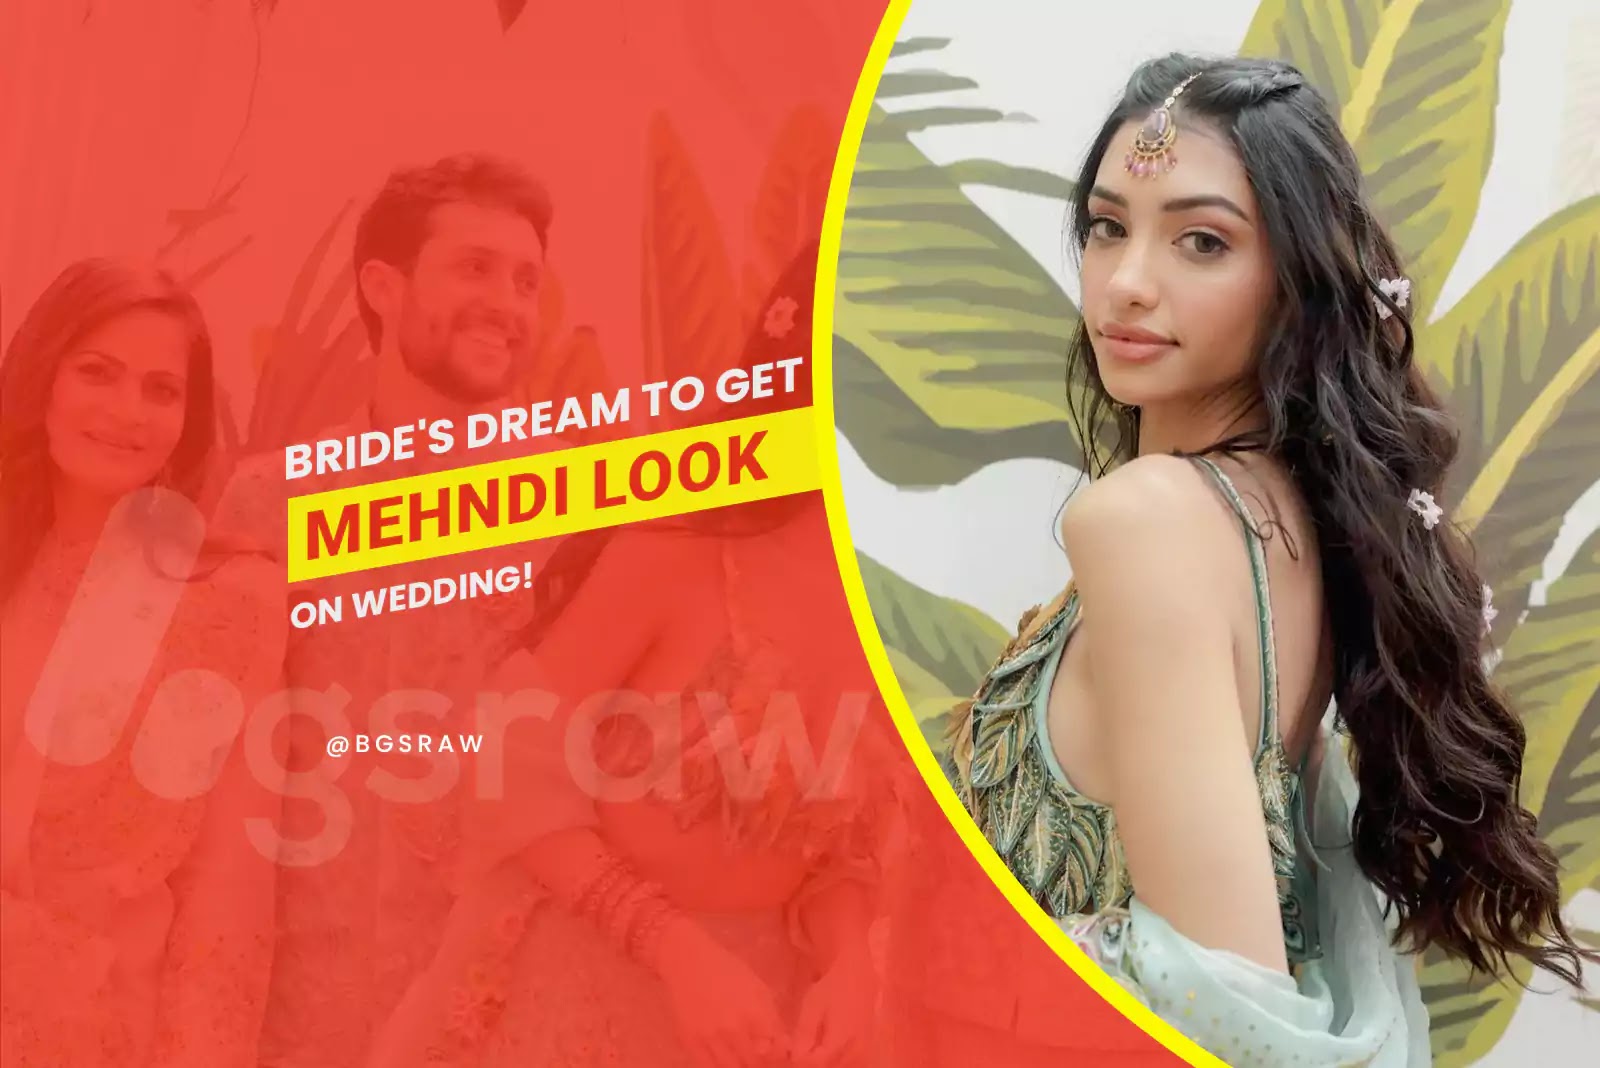 Every Bride’s Dream to Get this Mehndi Look on Wedding inspired by Alanna Panday